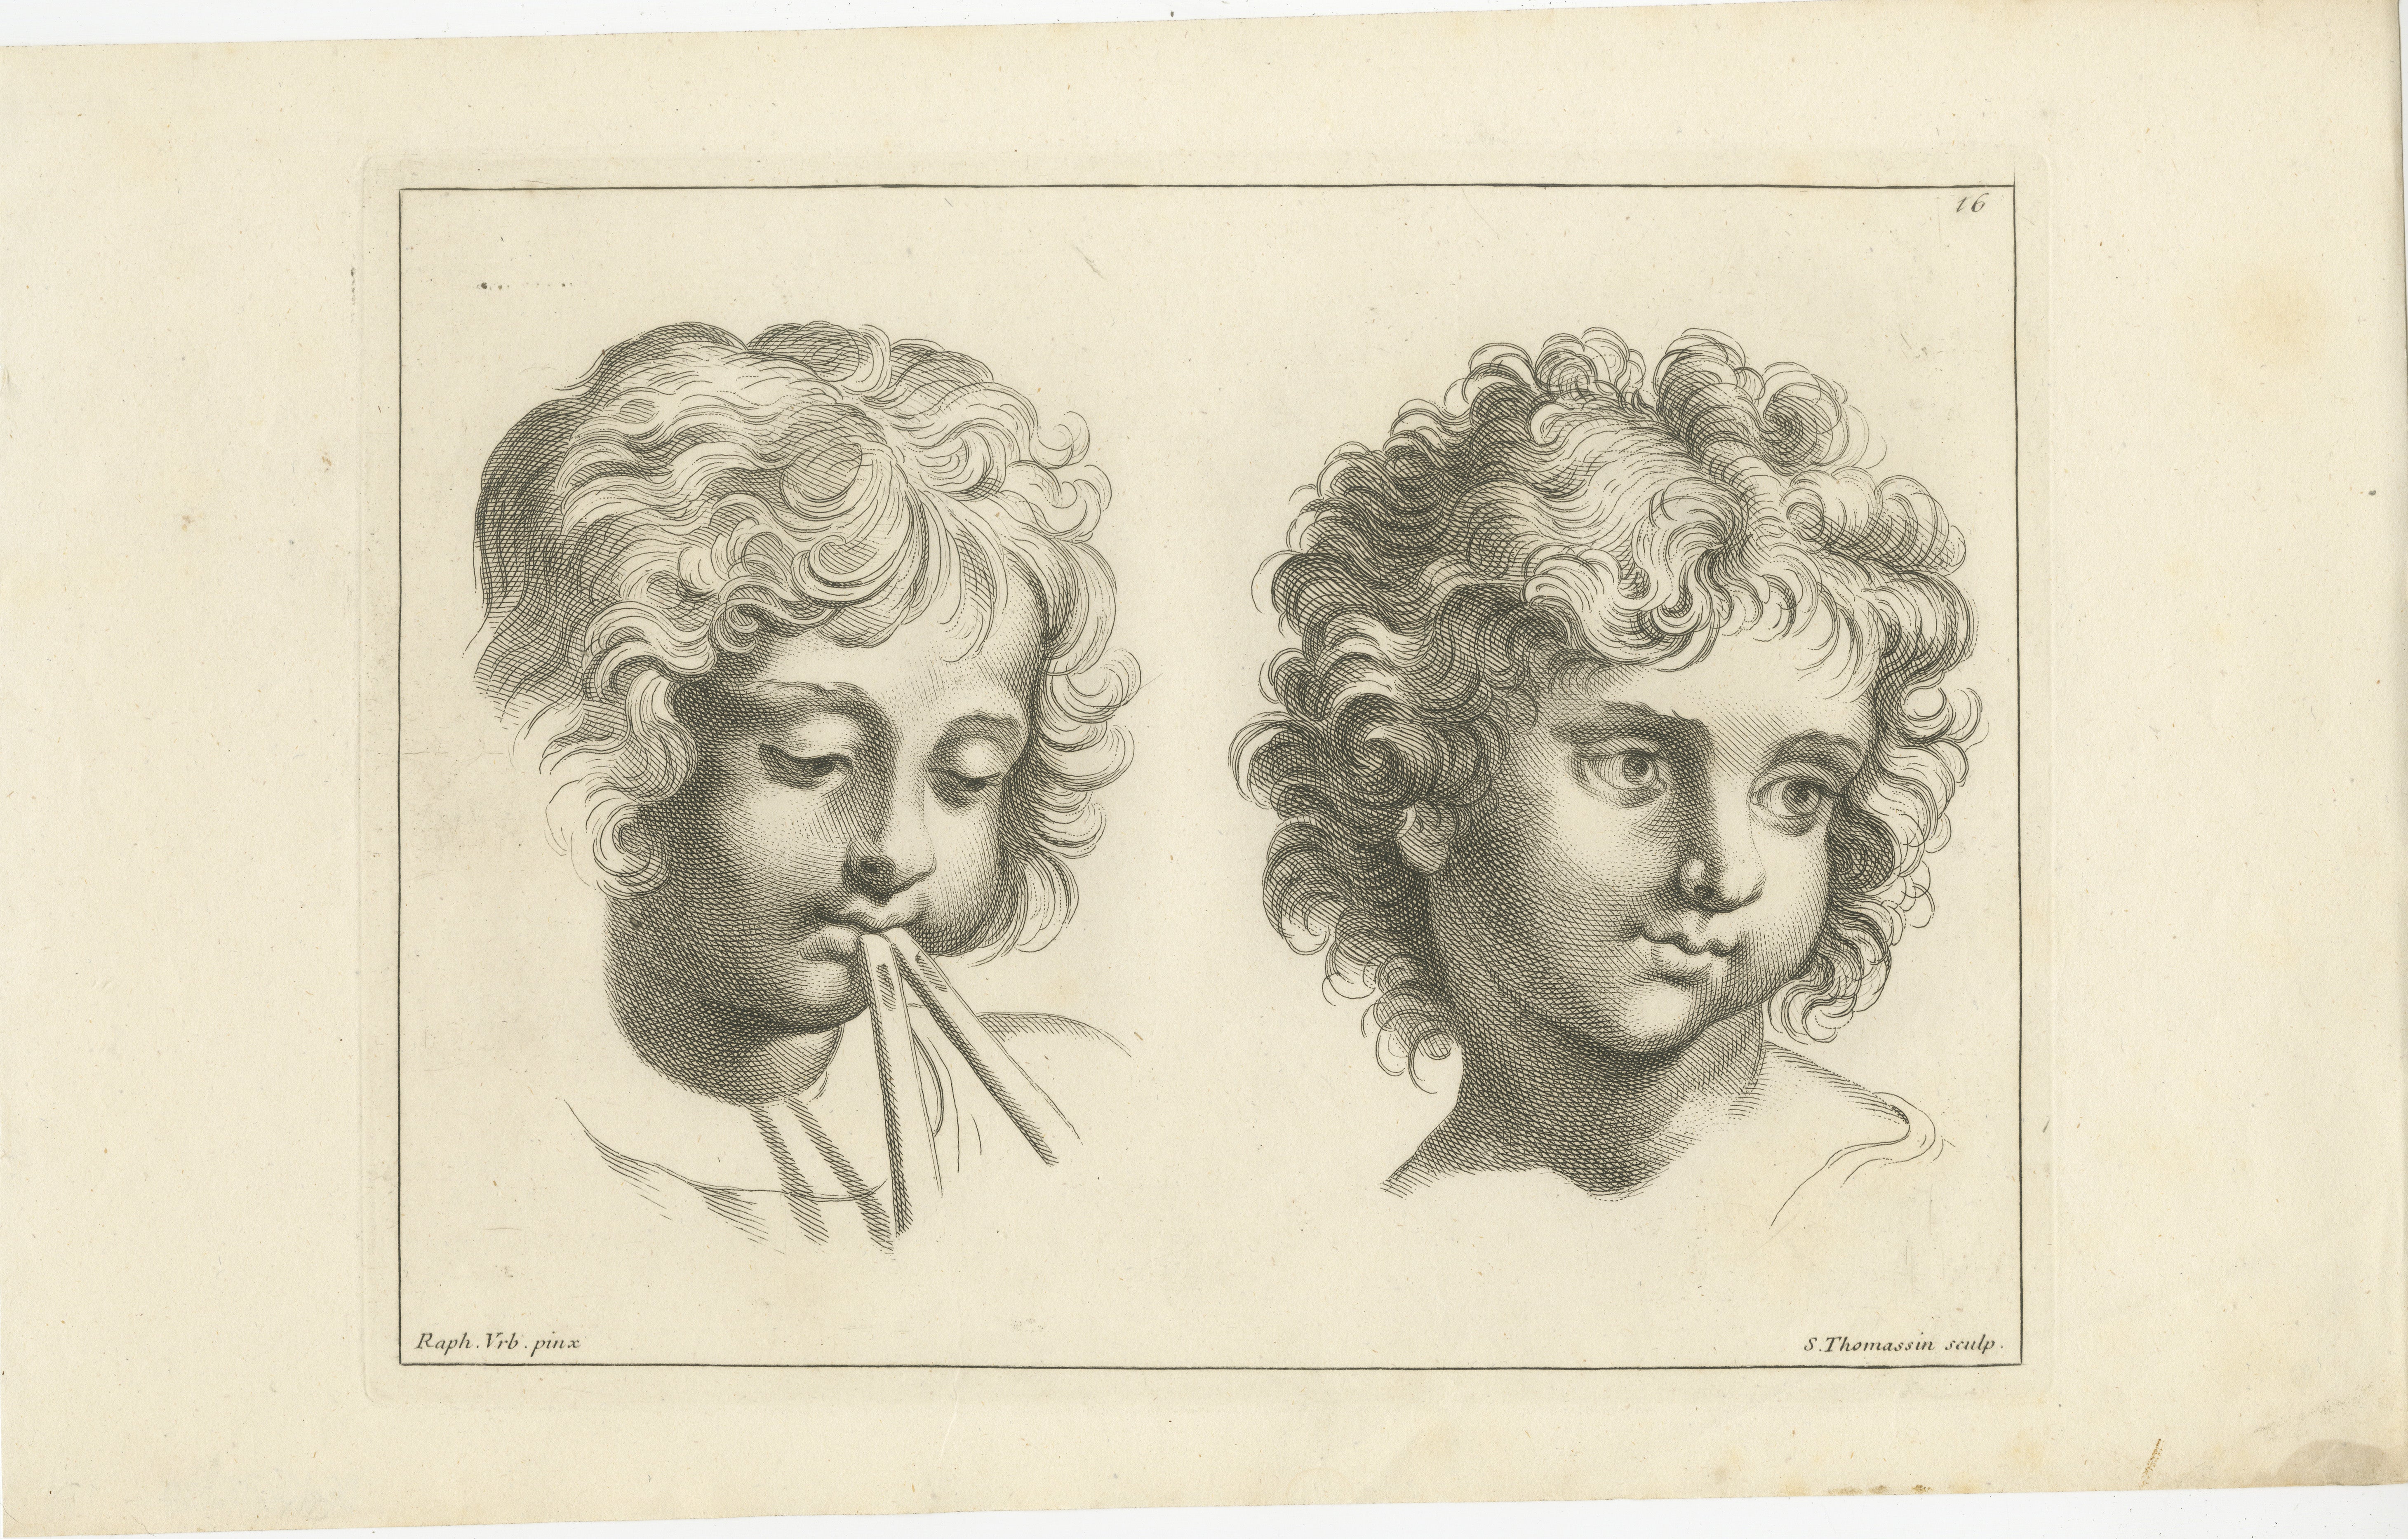 The engraving features two cherubic faces, each blowing an object that is not fully visible, which may be a wind instrument, giving life to an unseen melody. The cherubs, with their rounded cheeks and curly hair, are depicted with a mastery of line